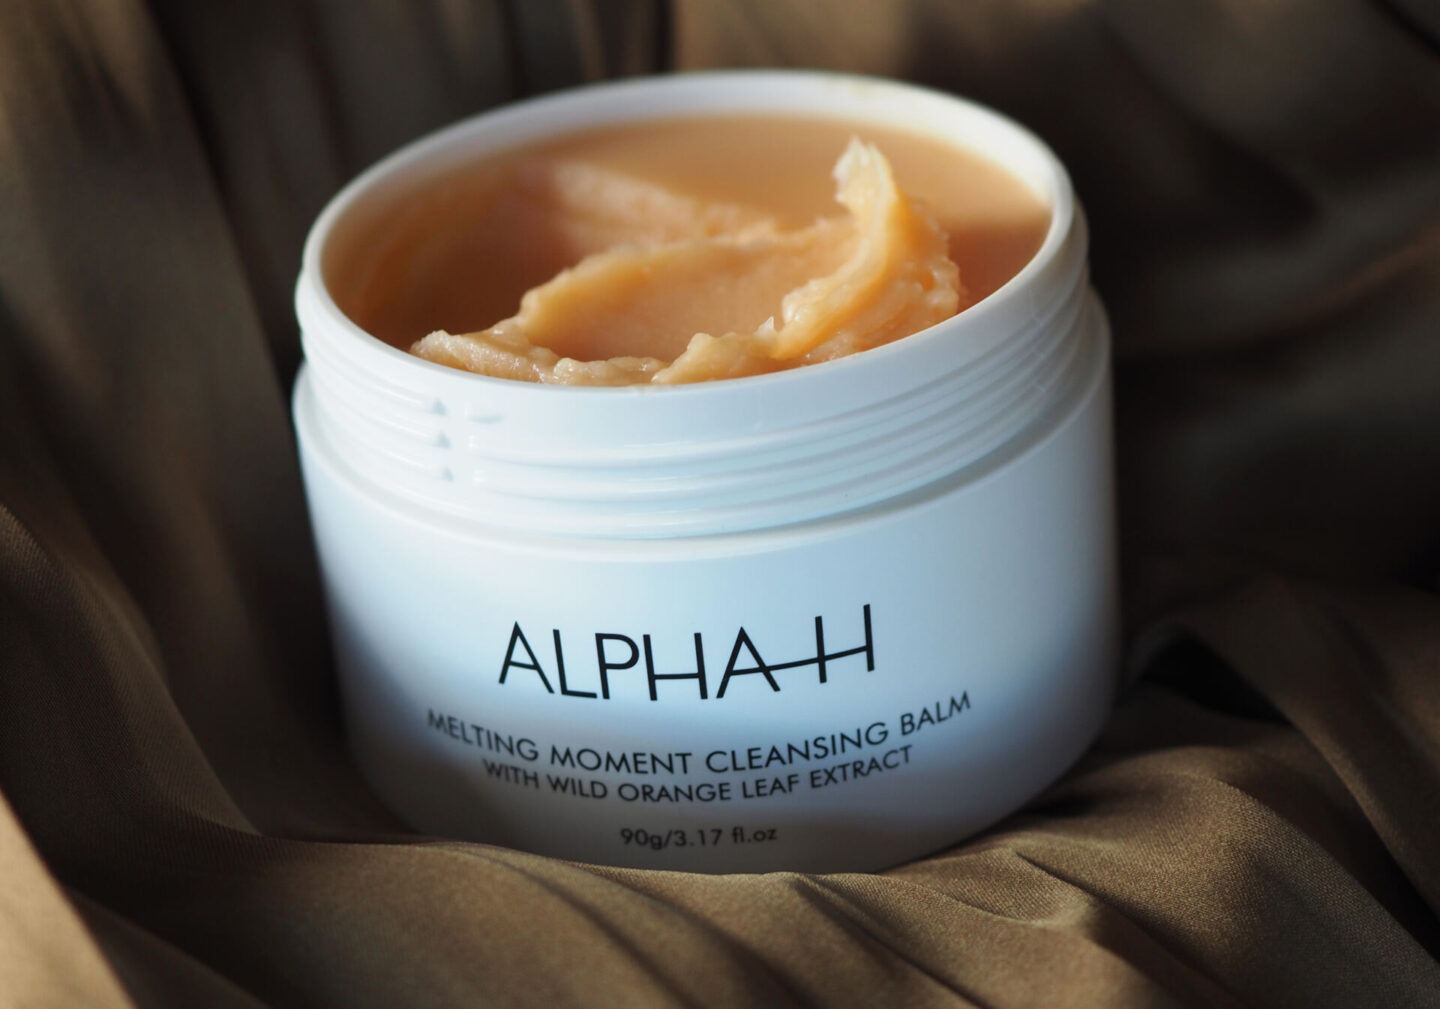 alpha h melting moment cleansing balm review